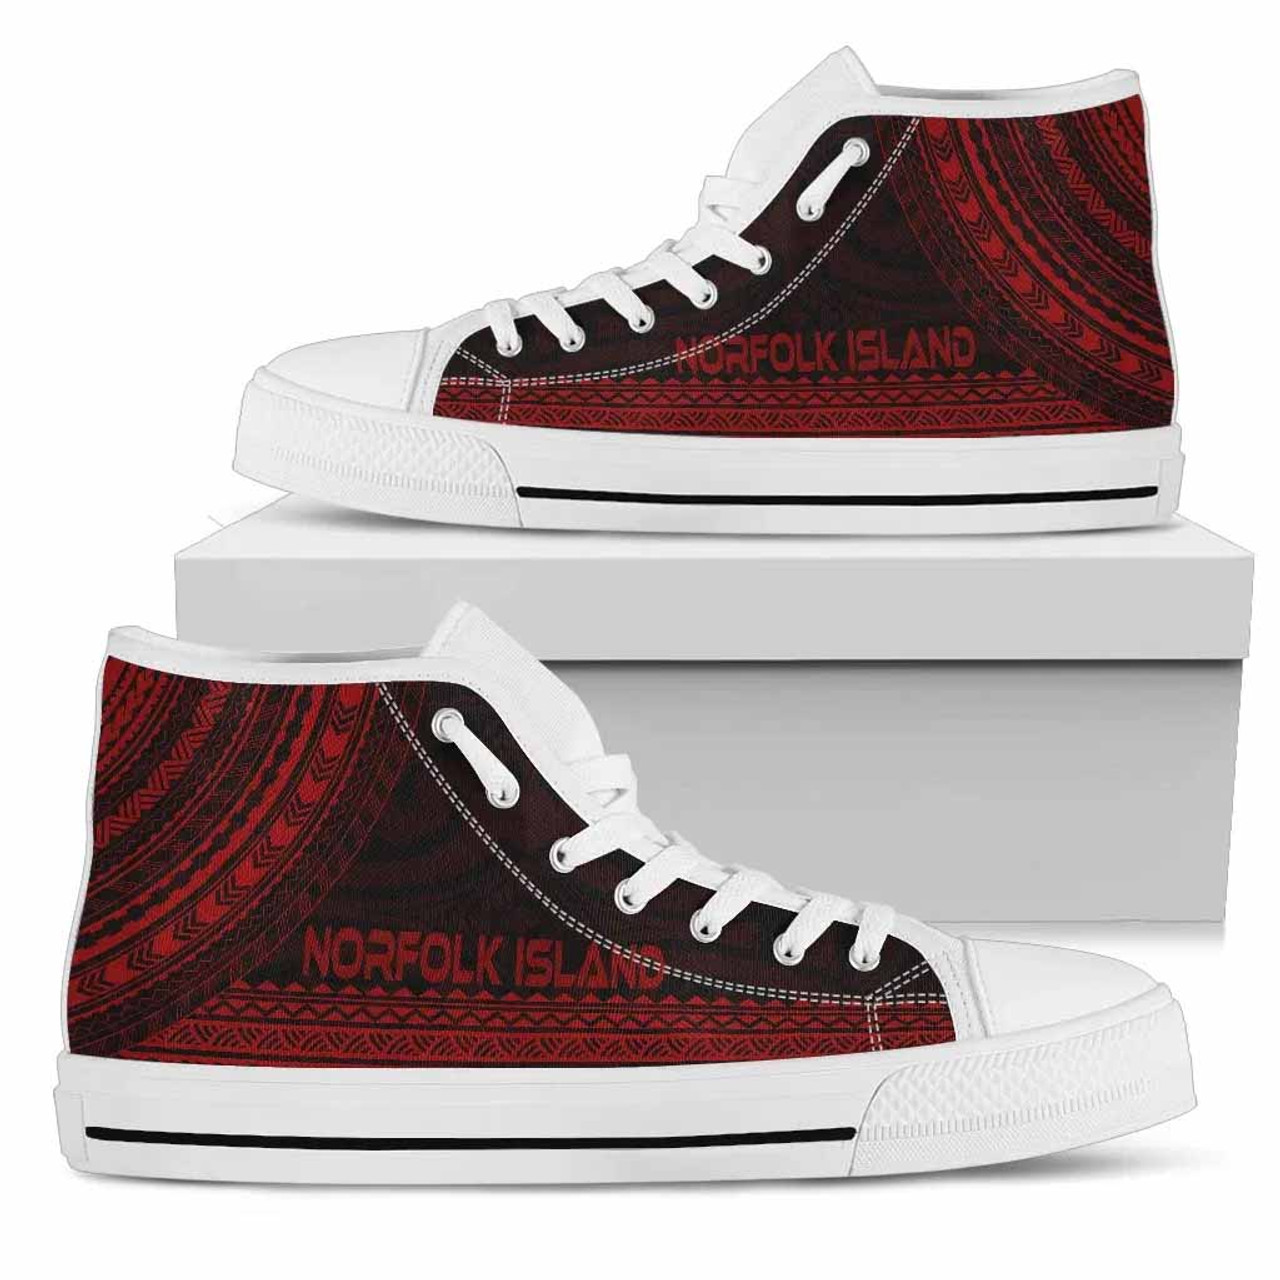 Norfolk Island High Top Shoes - Polynesian Red Chief Version 1